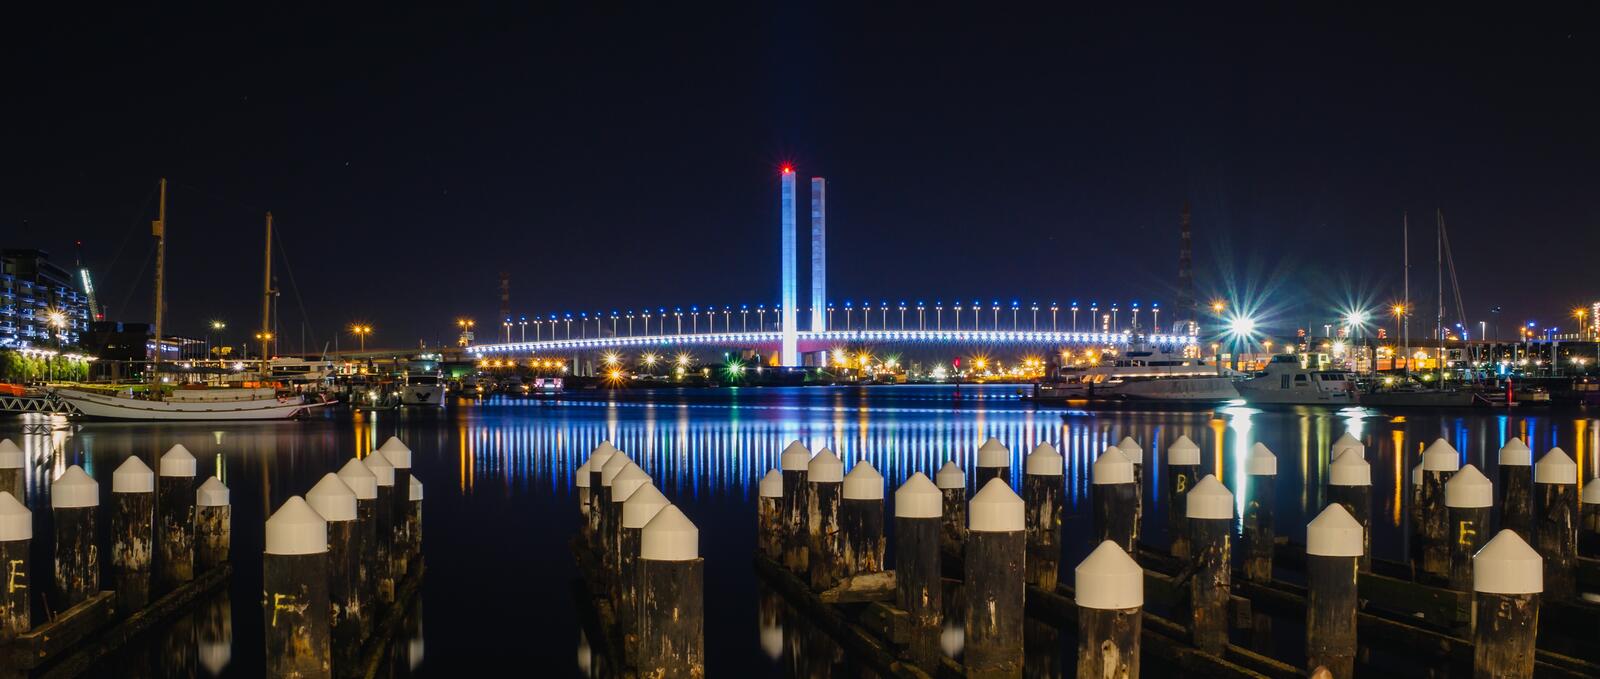 Free photo View of the illuminated bridge over the river at night